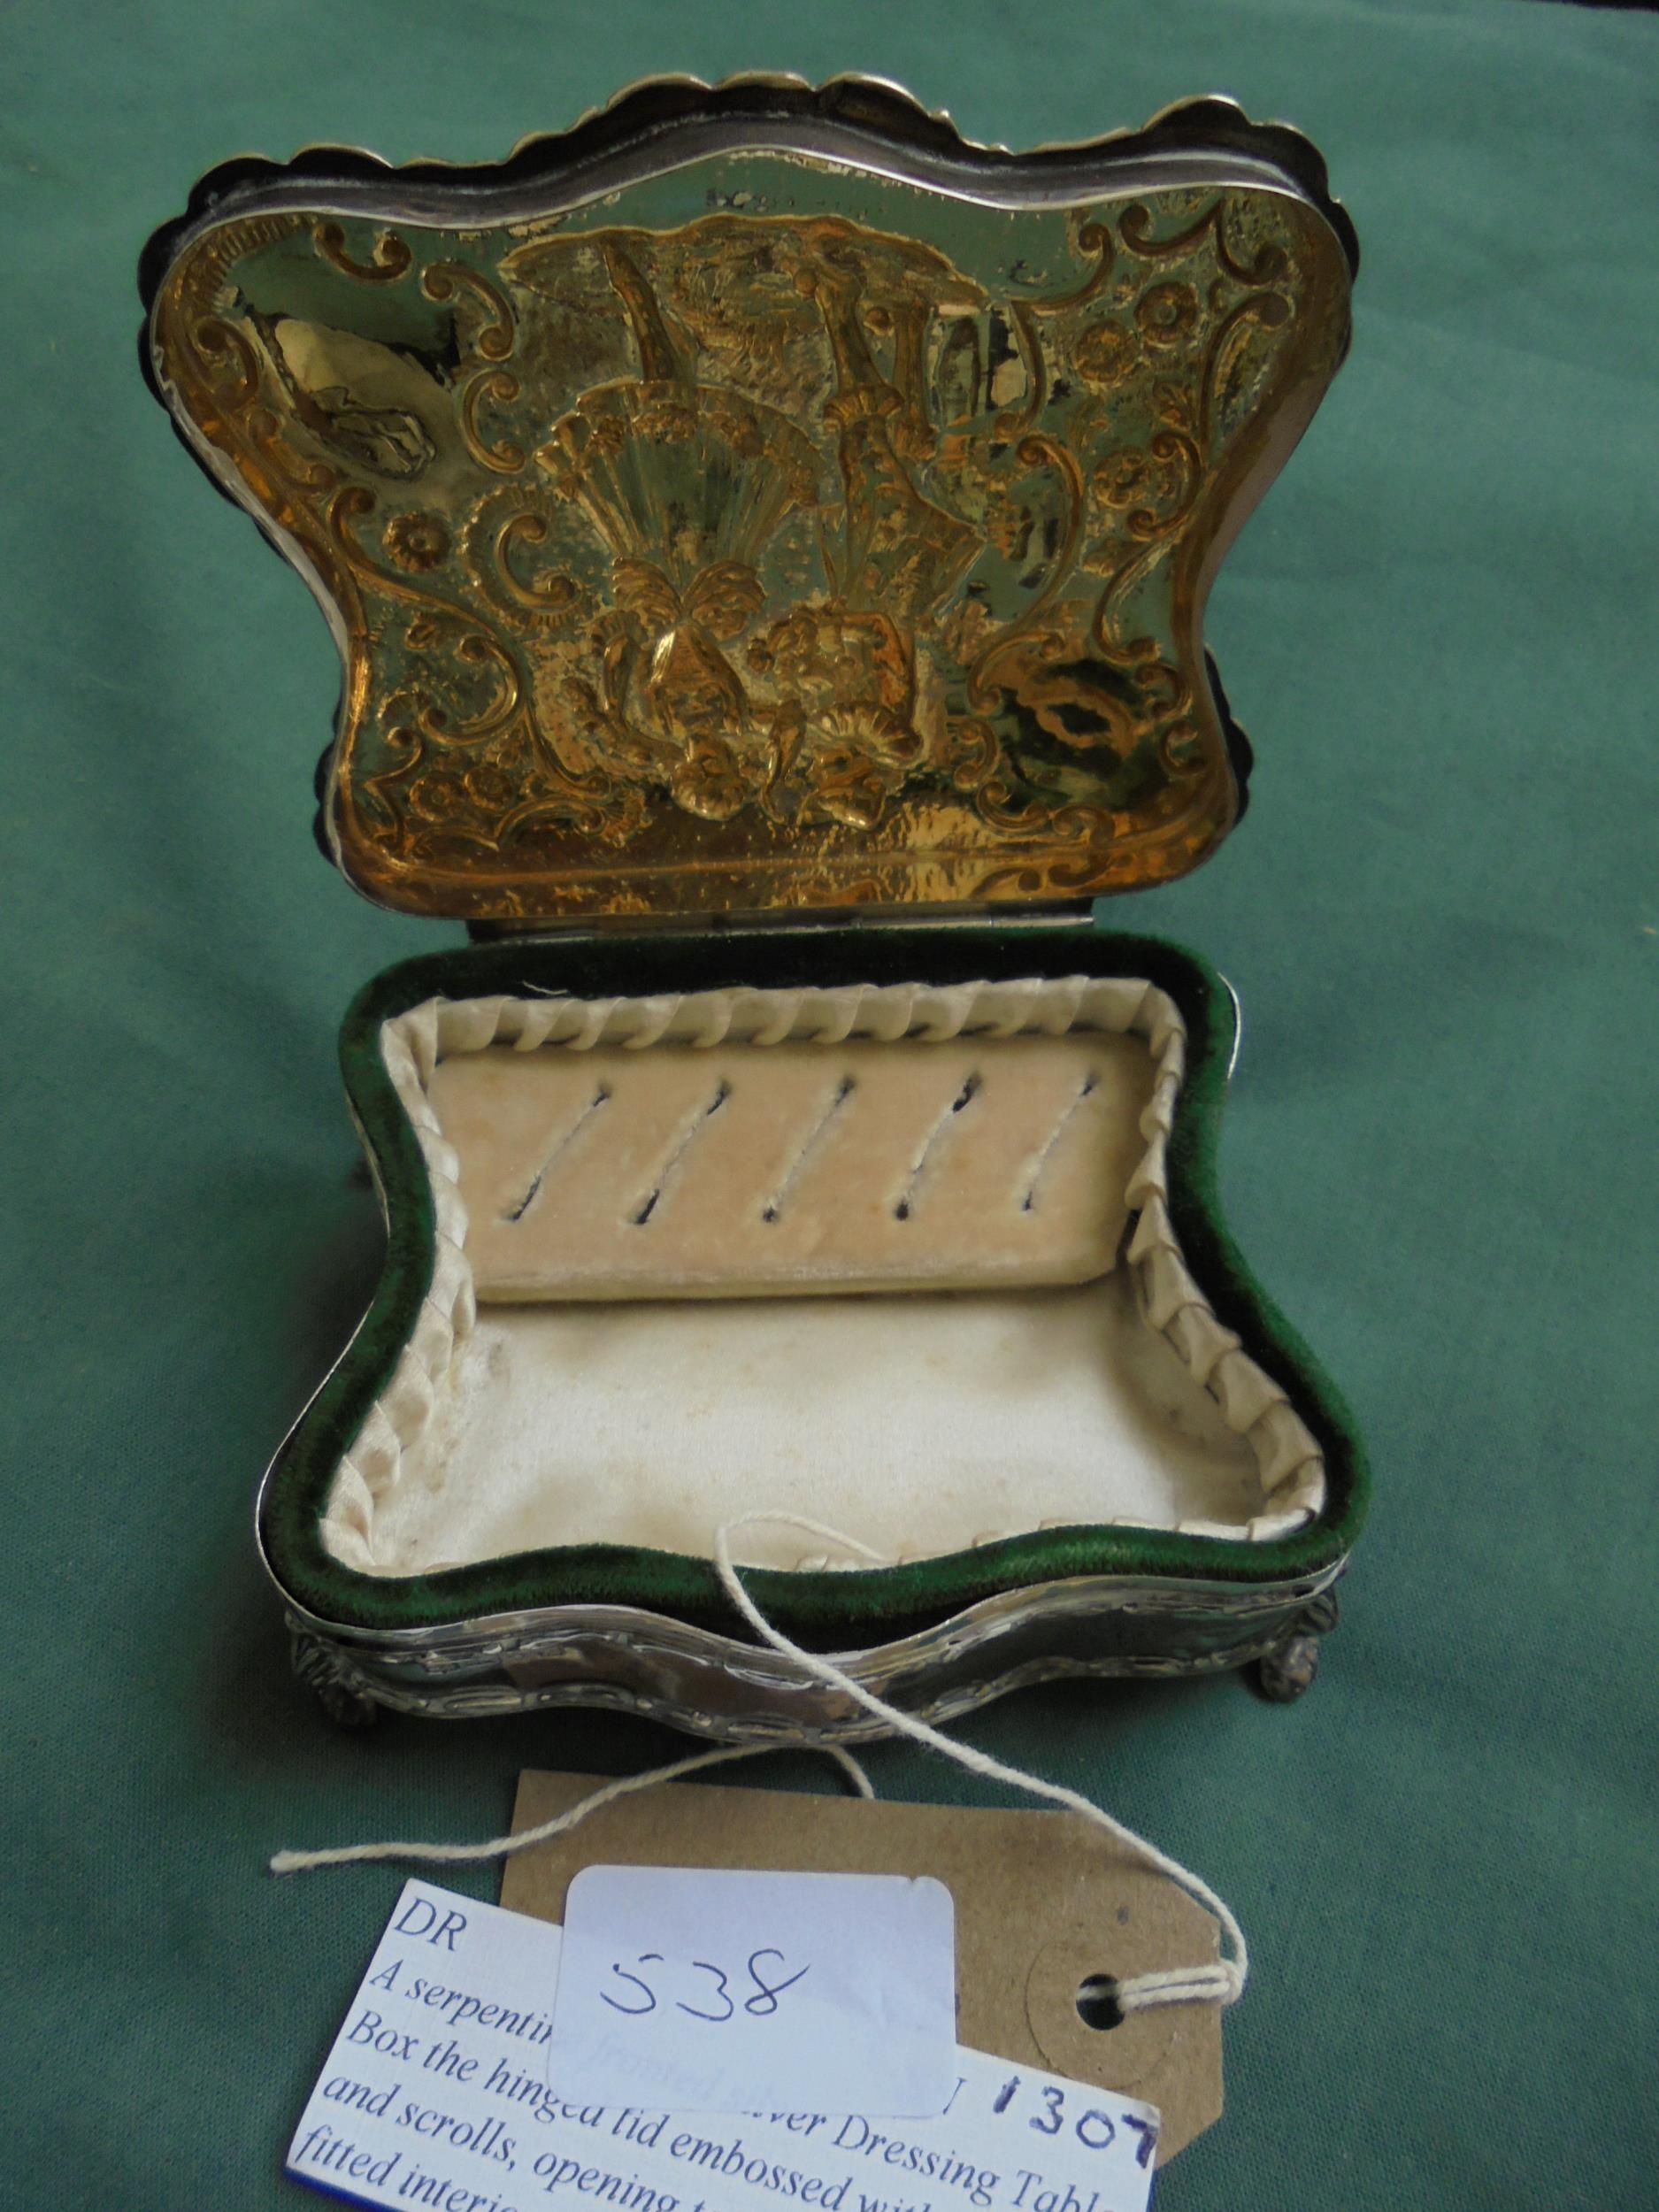 Highly ddecorated laddies jewellery/ring box with hinged lid, serpentine front,